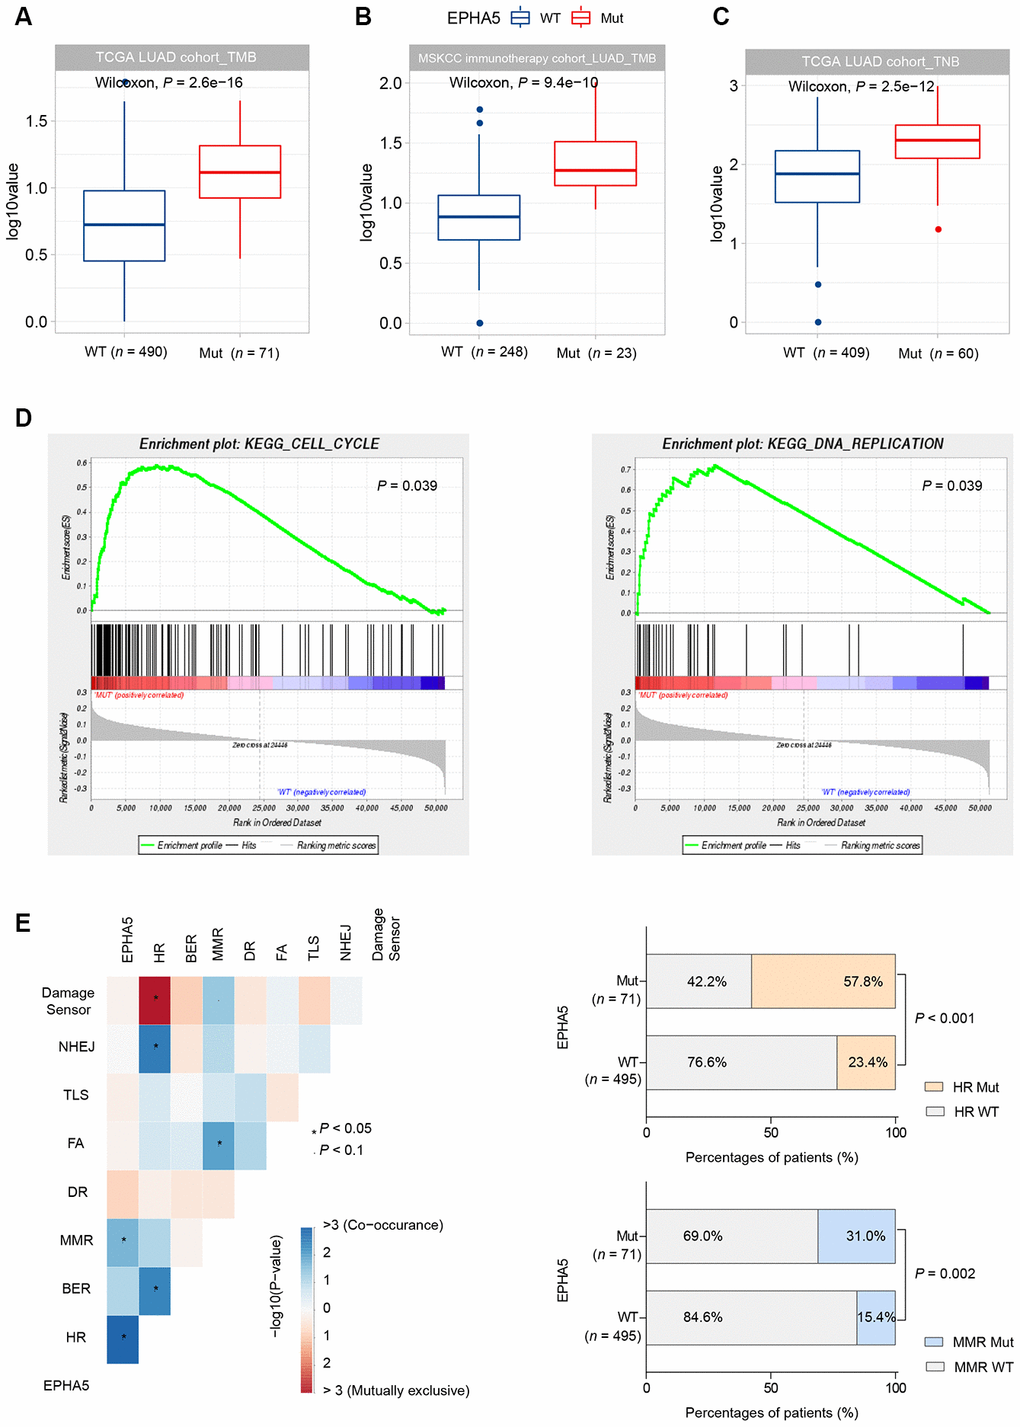 EPHA5 mutations are related to increased TMB and TNB in LUAD. EPHA5-Mut tumors had a markedly higher TMB than EPHA5-WT tumors in both the (A) TCGA LUAD cohort and (B) MSKCC immunotherapy LUAD cohort. The ordinate log10value represents log10(TMB+1). (C) In the TCGA LUAD cohort, EPHA5-Mut tumors had an increased immunogenic TNB. The ordinate log10value representslog10(TNB+1). (D) EPHA5 mutations were positively correlated with enrichment of the cell cycle and DNA replication pathways in the TCGA LUAD cohort. (E) Significantly increased mutation frequencies of genes in the HR and MMR pathways were observed in EPHA5-Mut tumors in the TCGA LUAD cohort.